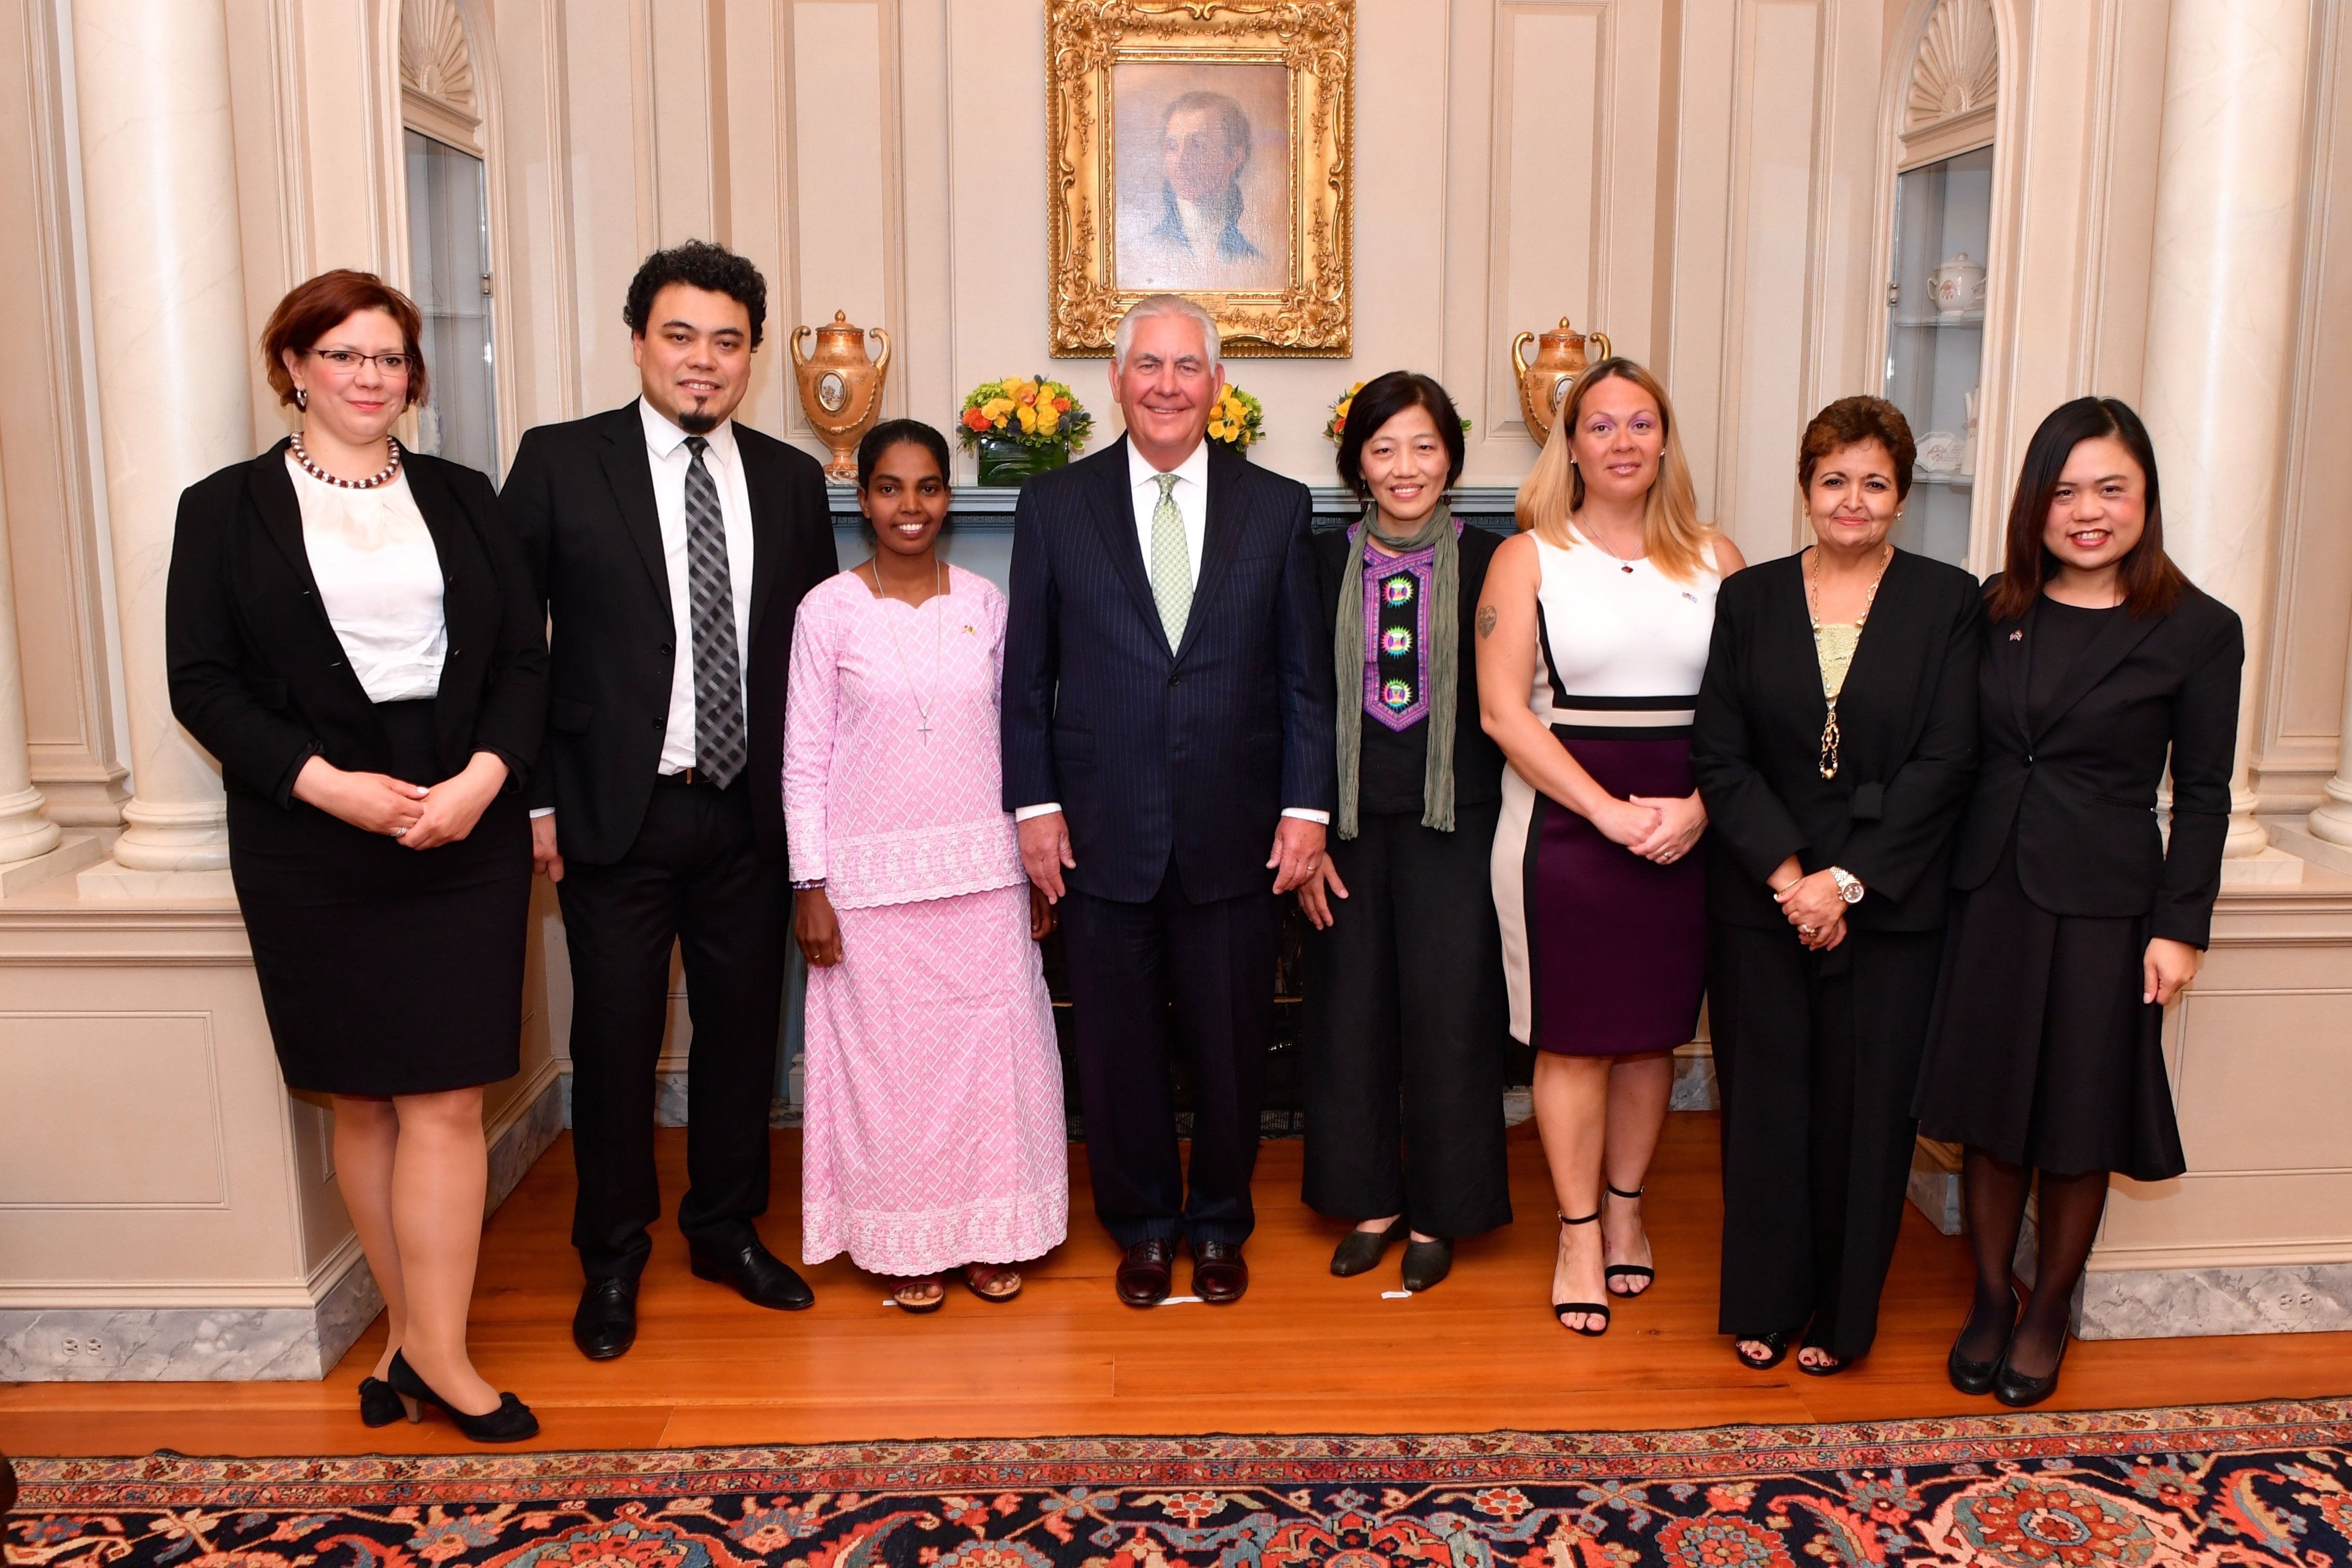 US Secretary of State Rex Tillerson (fourth left) poses with 2017 Trafficking in Persons Heroes in Washington on June 27. Heroes honoured this year were from Argentina, Brazil, Cameroon, Hungary, India, Morocco, Taiwan and Thailand. Photo: EPA/US Department of State